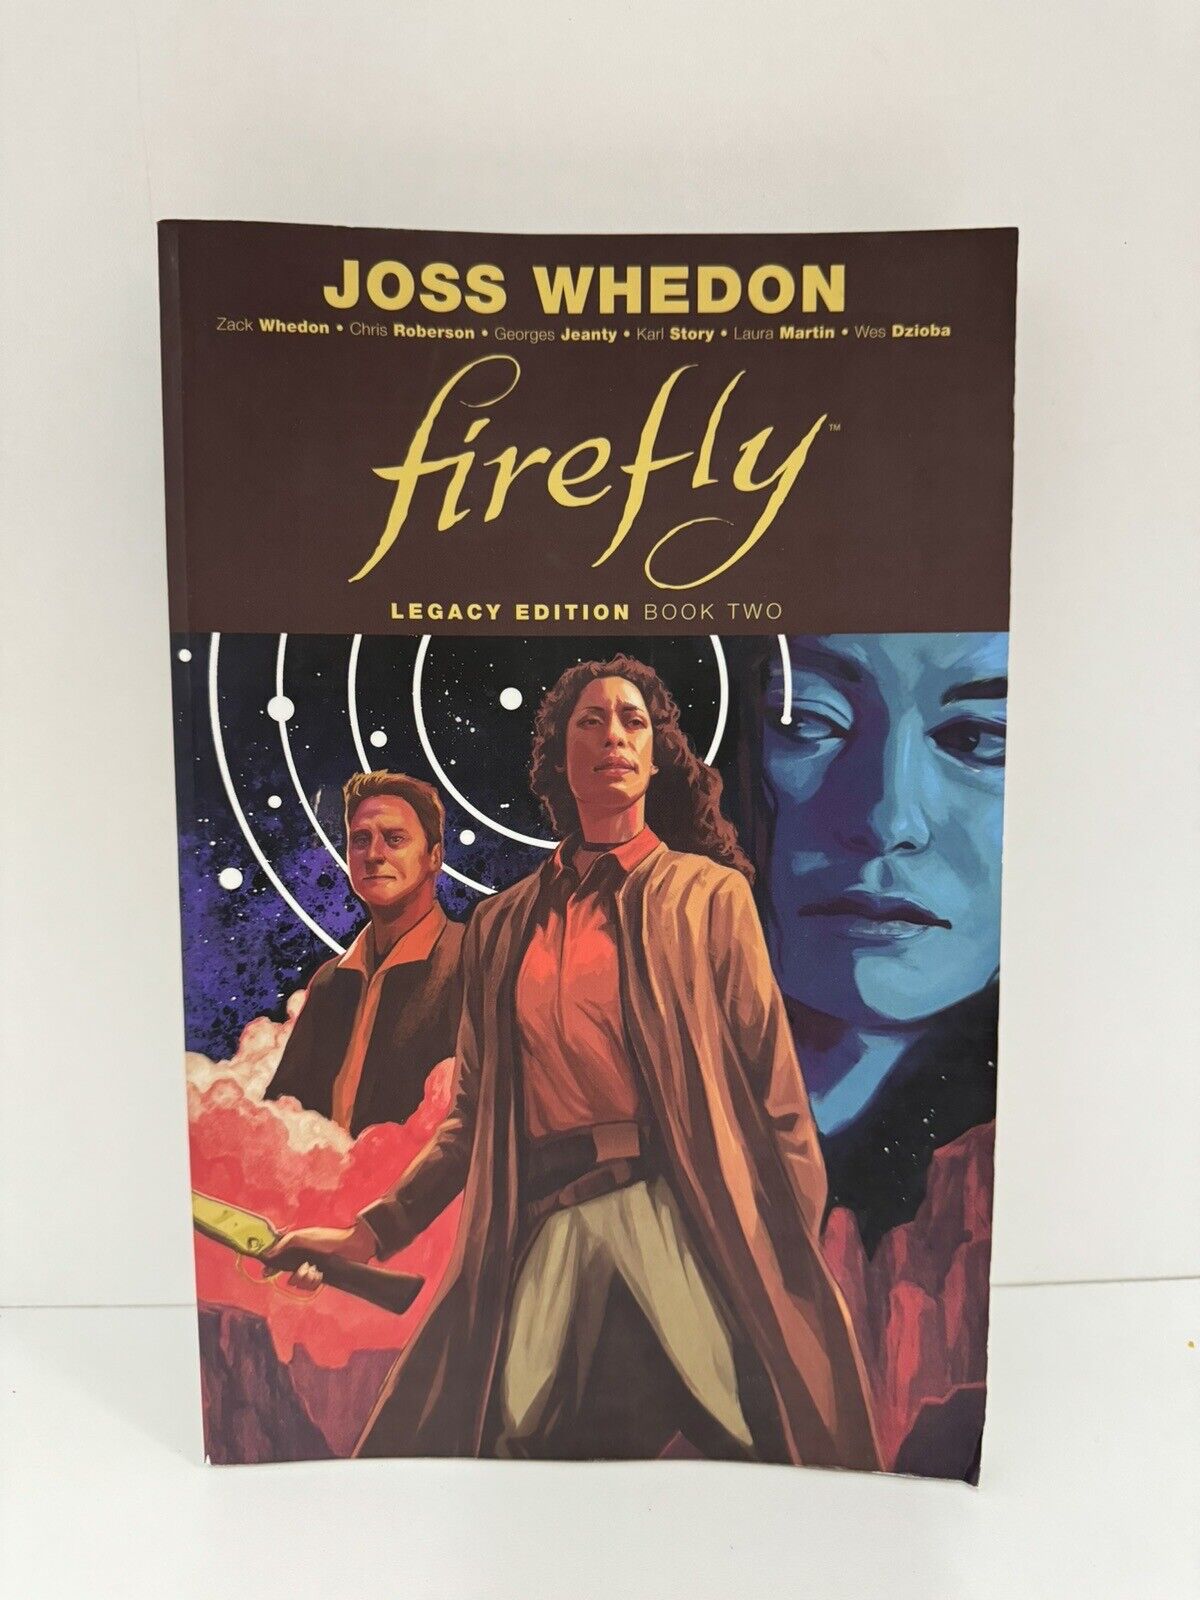 Zack Whedon Chris Roberson Firefly: Legacy Edition Book Two (Paperback) Firefly